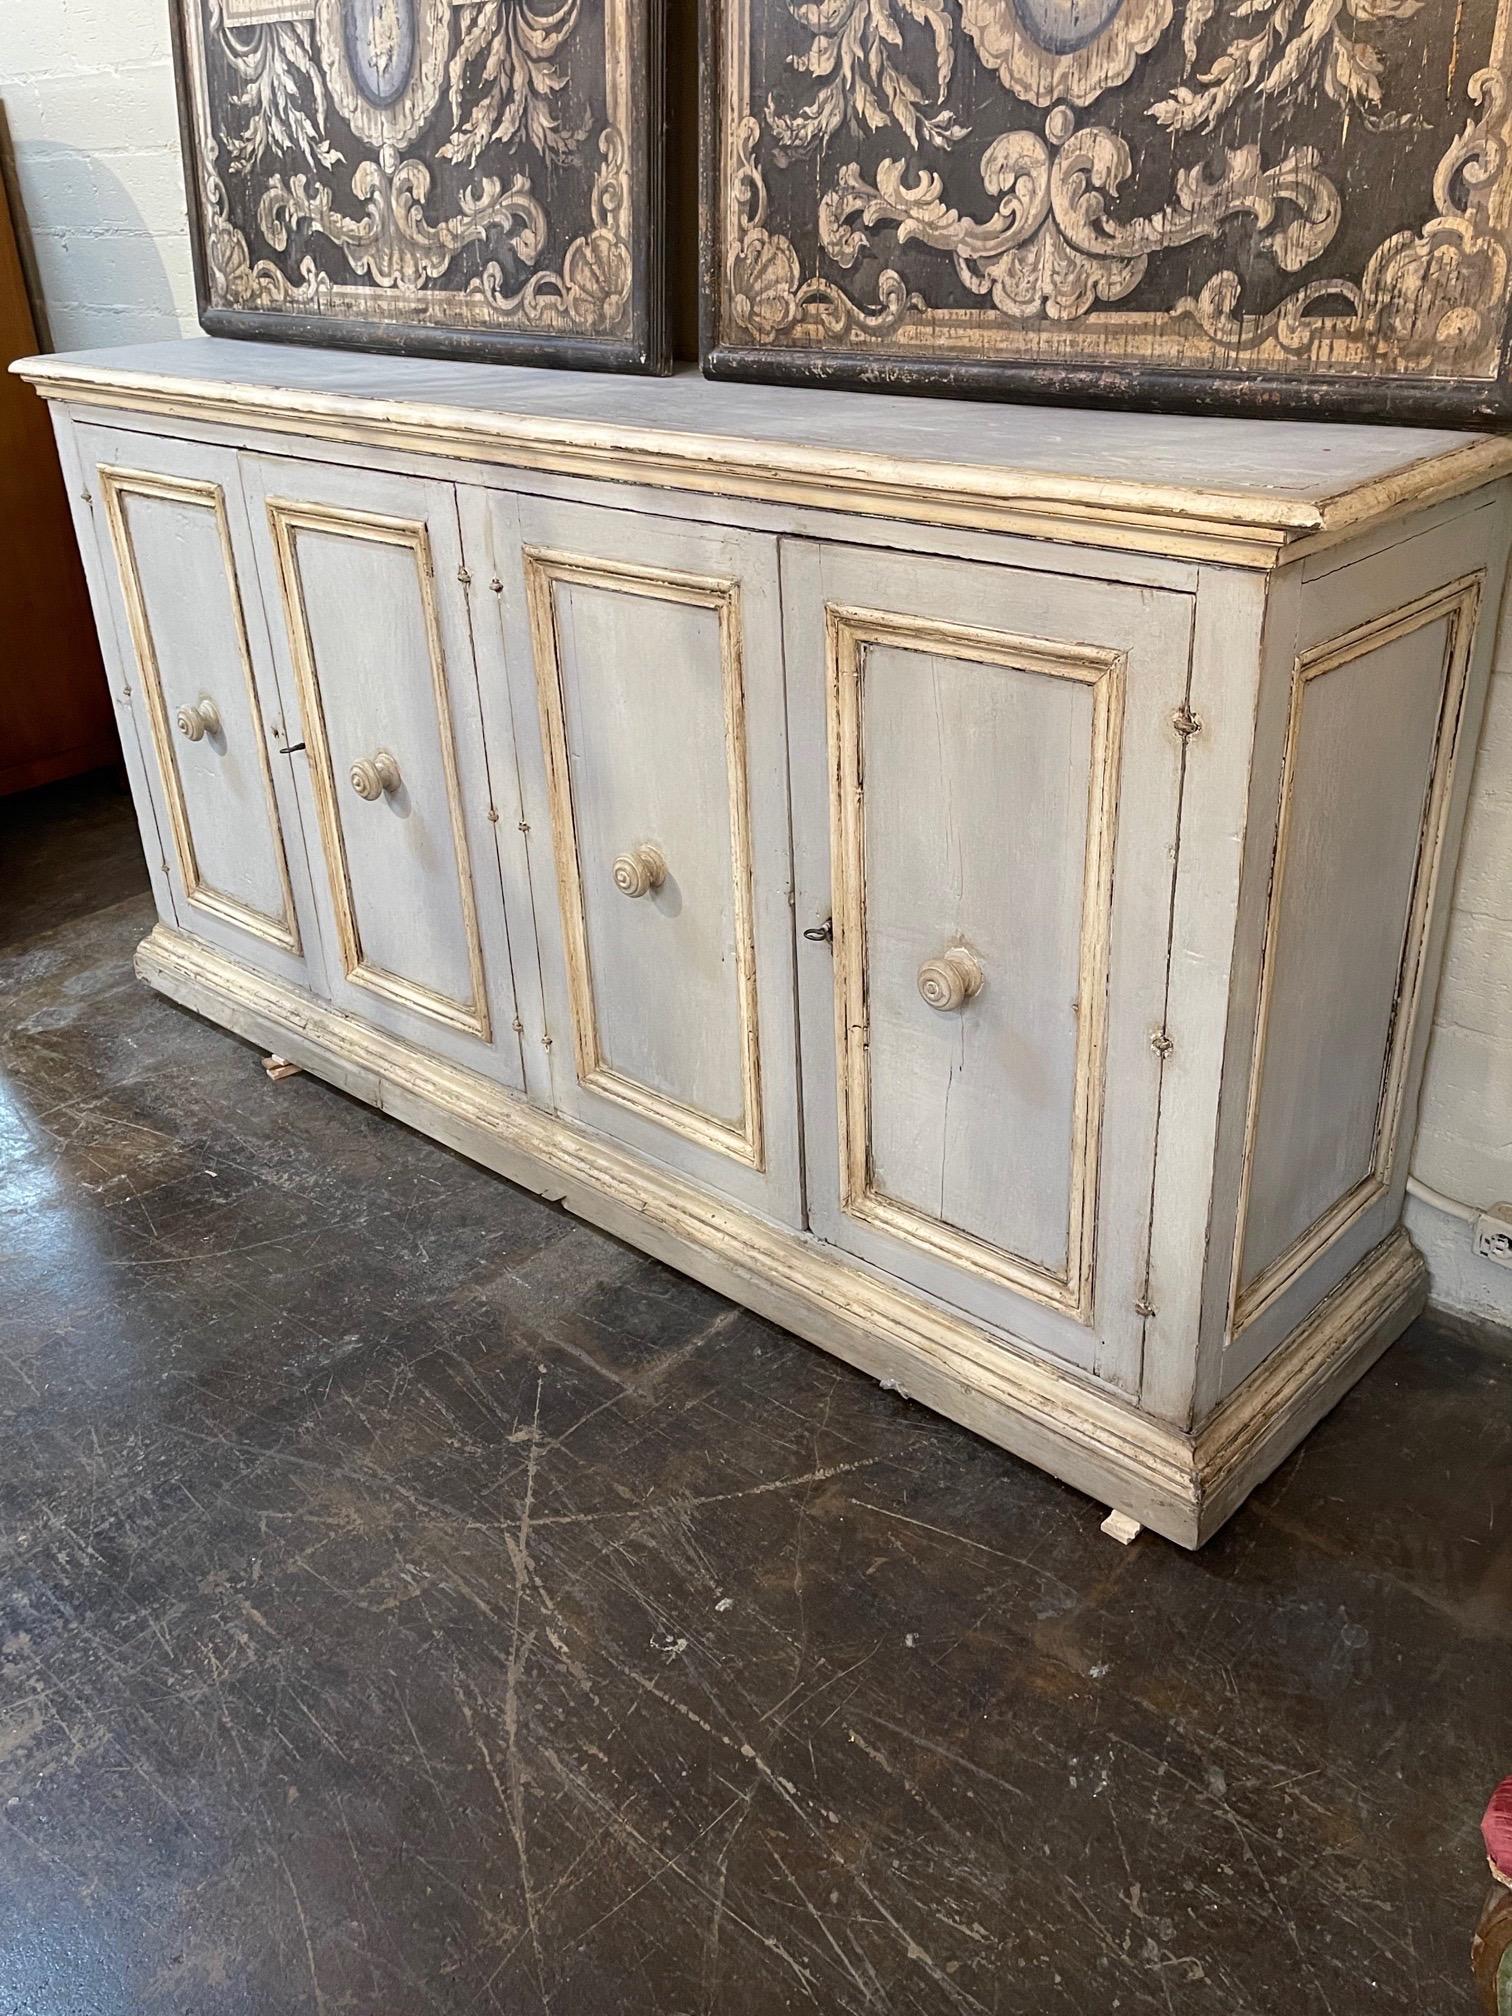 Beautiful 18th century Italian painted buffet from Tuscany. Nice pale grey color with a very nice patina. Great for the modern farmhouse look!